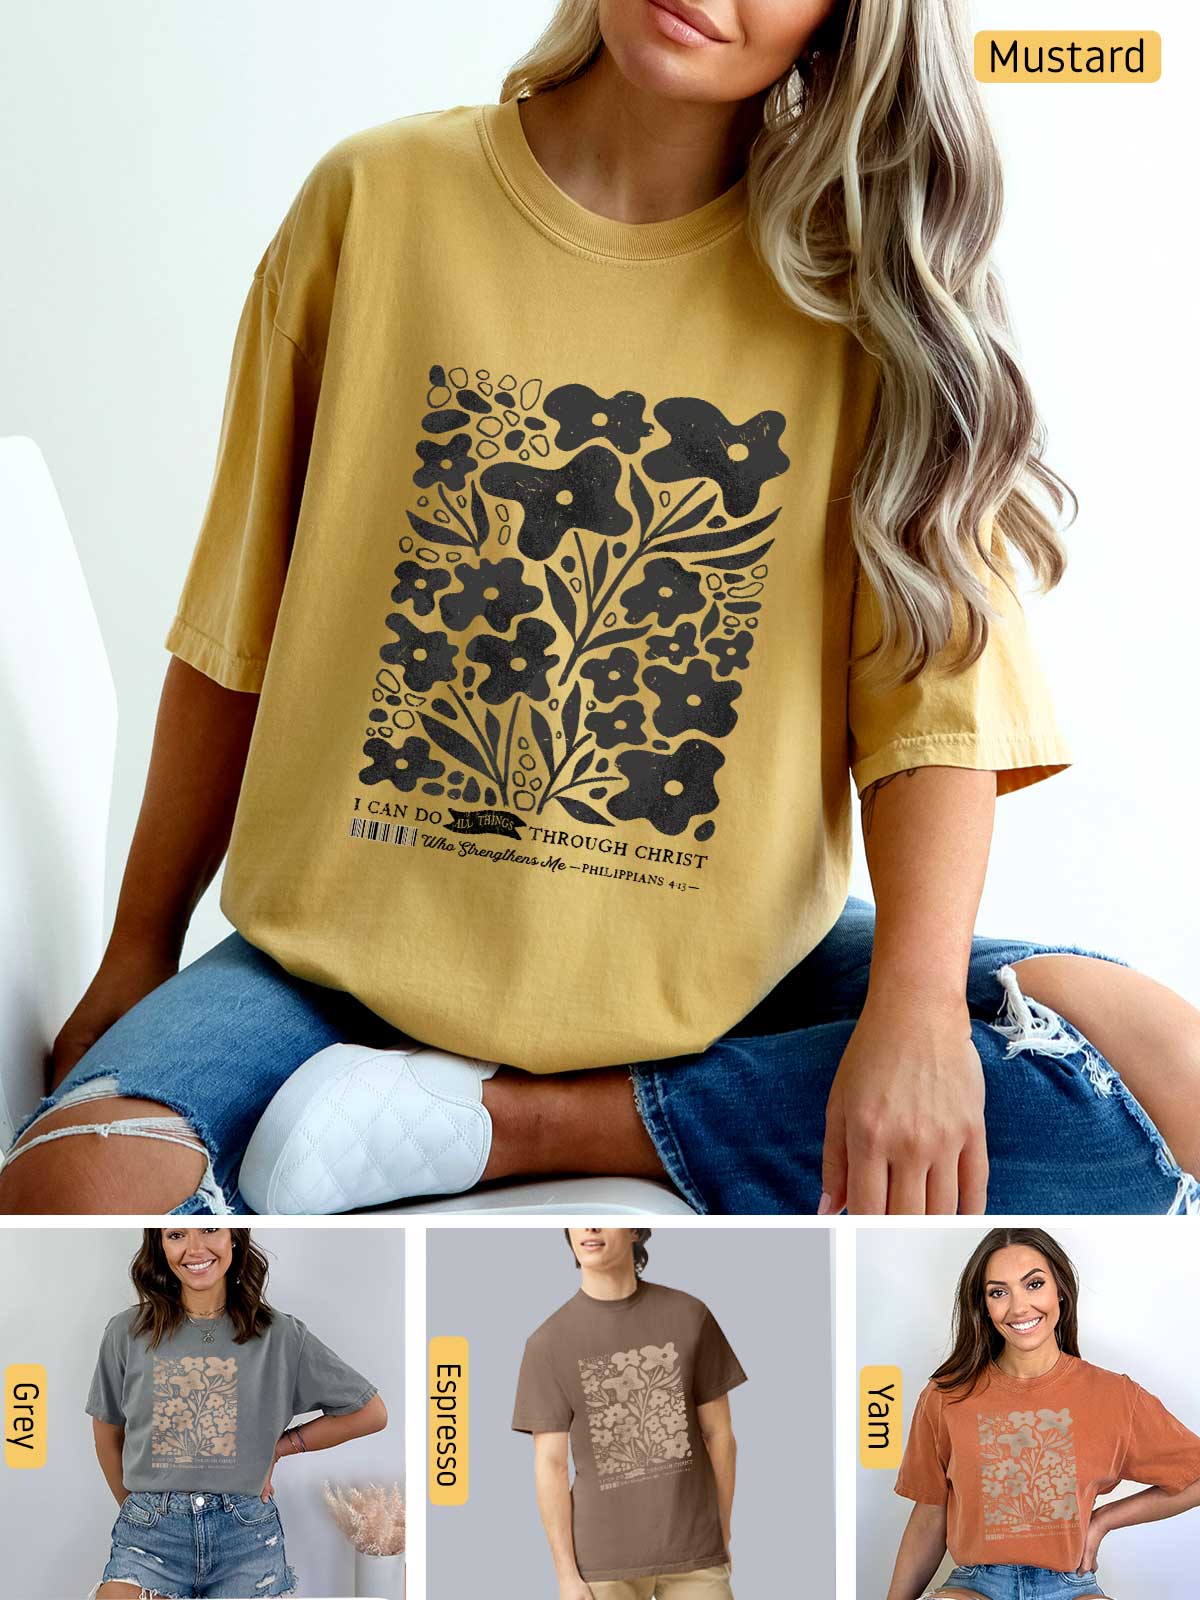 a woman wearing a mustard colored t - shirt with a tree on it